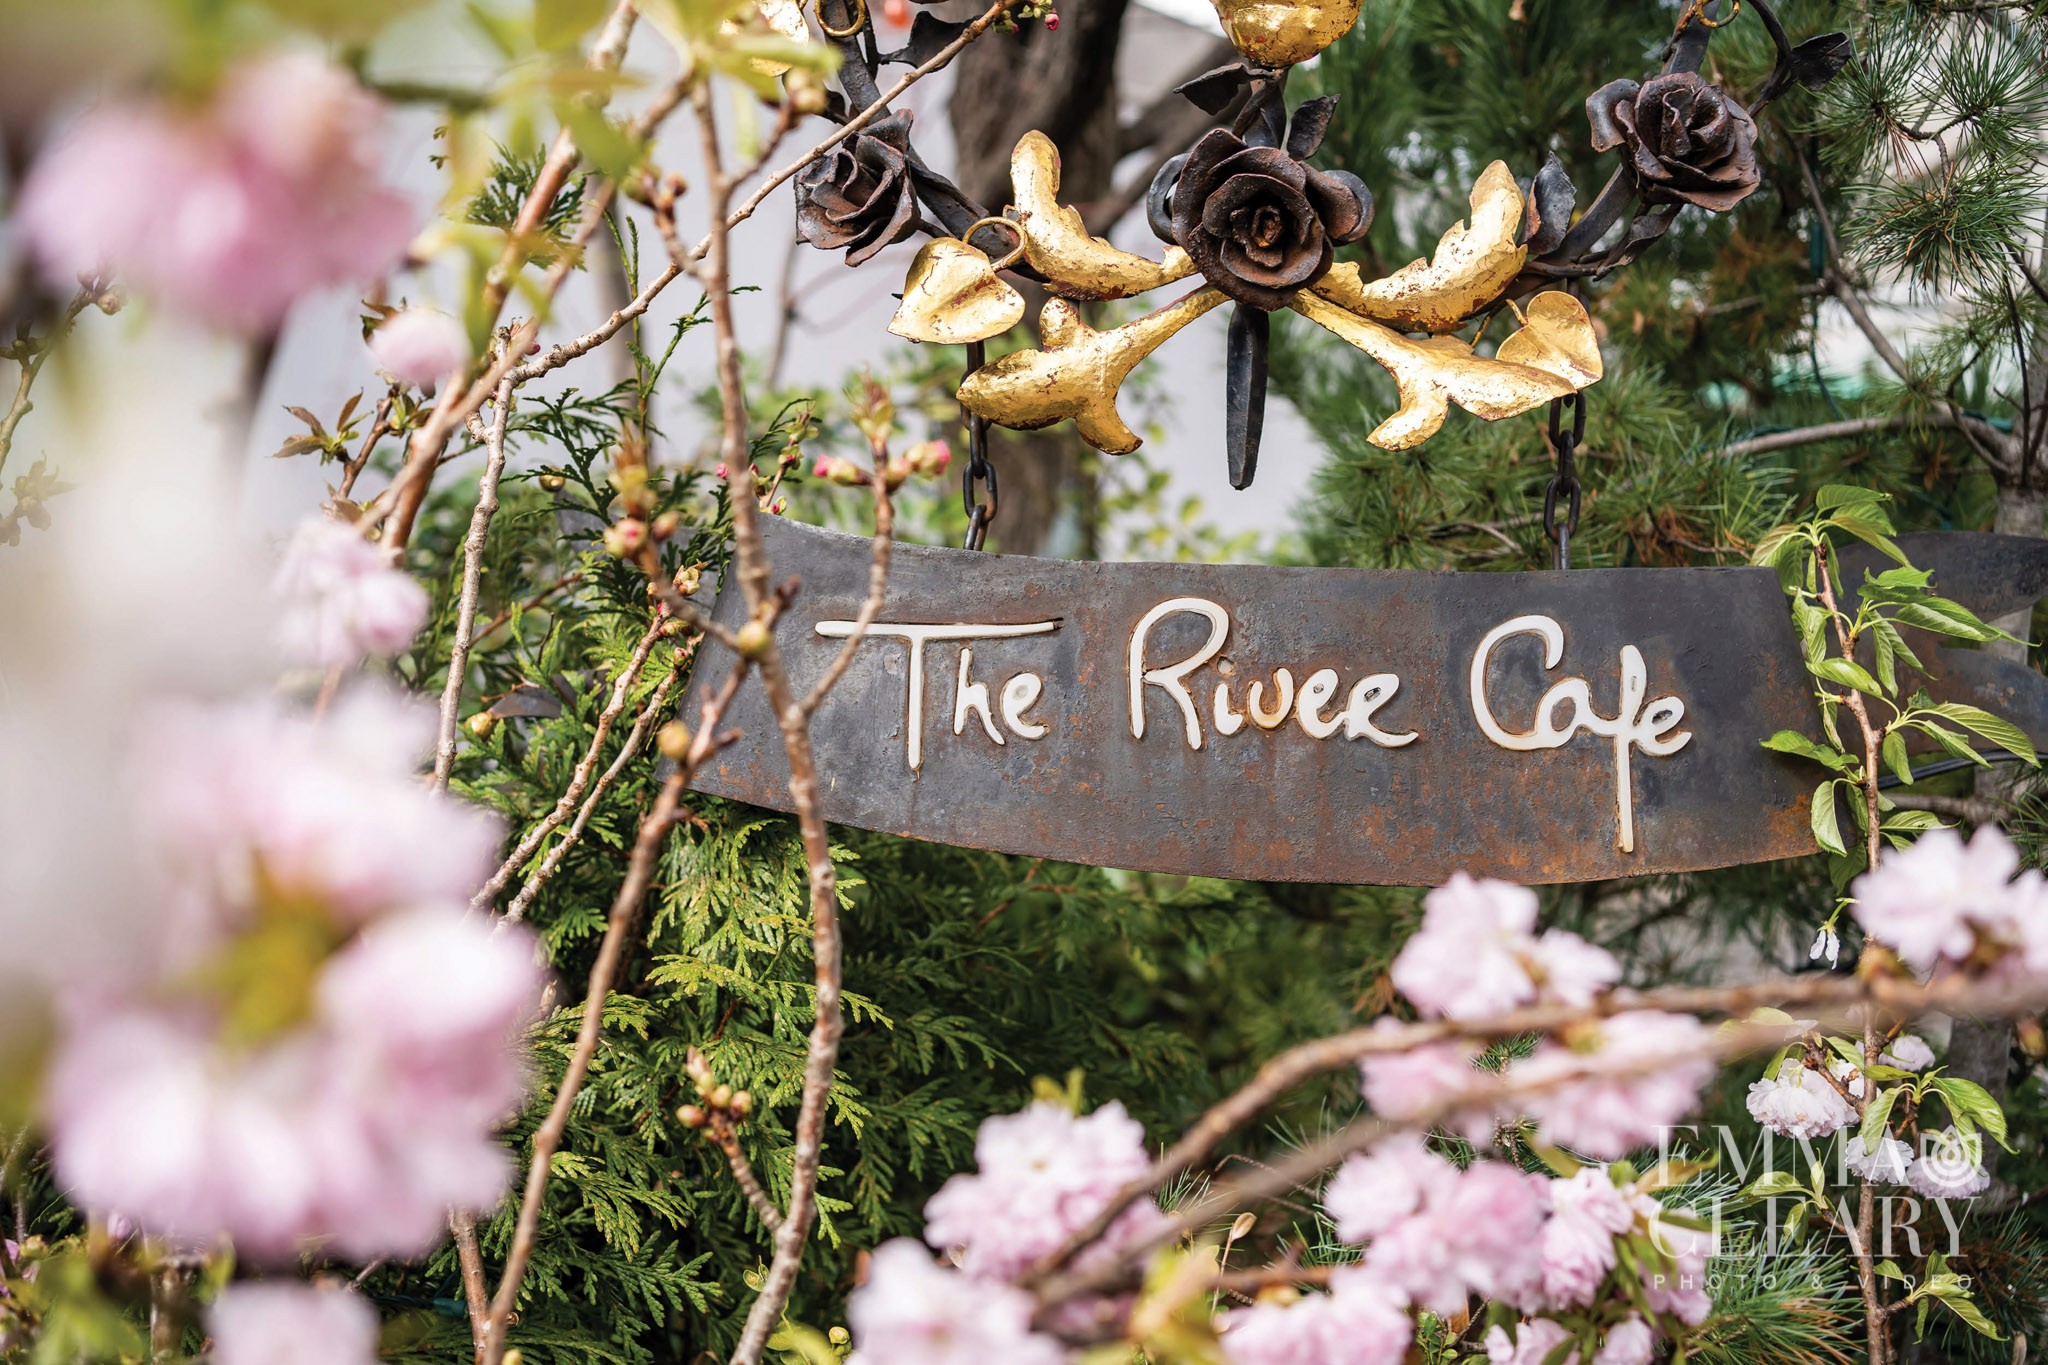 the river cafe wedding photography 